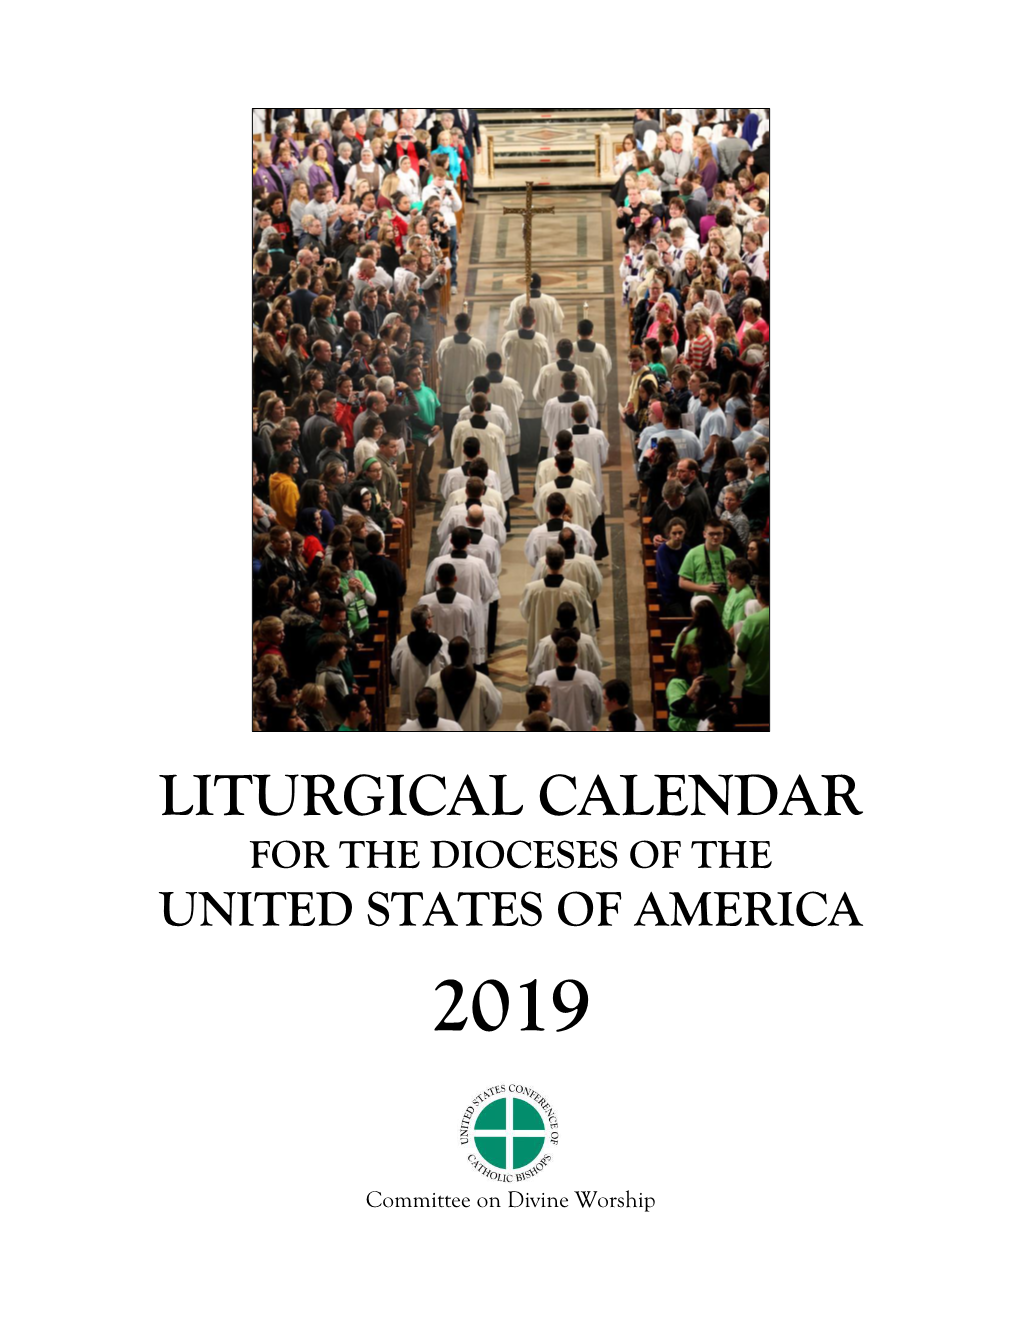 Liturgical Calendar for the Dioceses of the United States of America